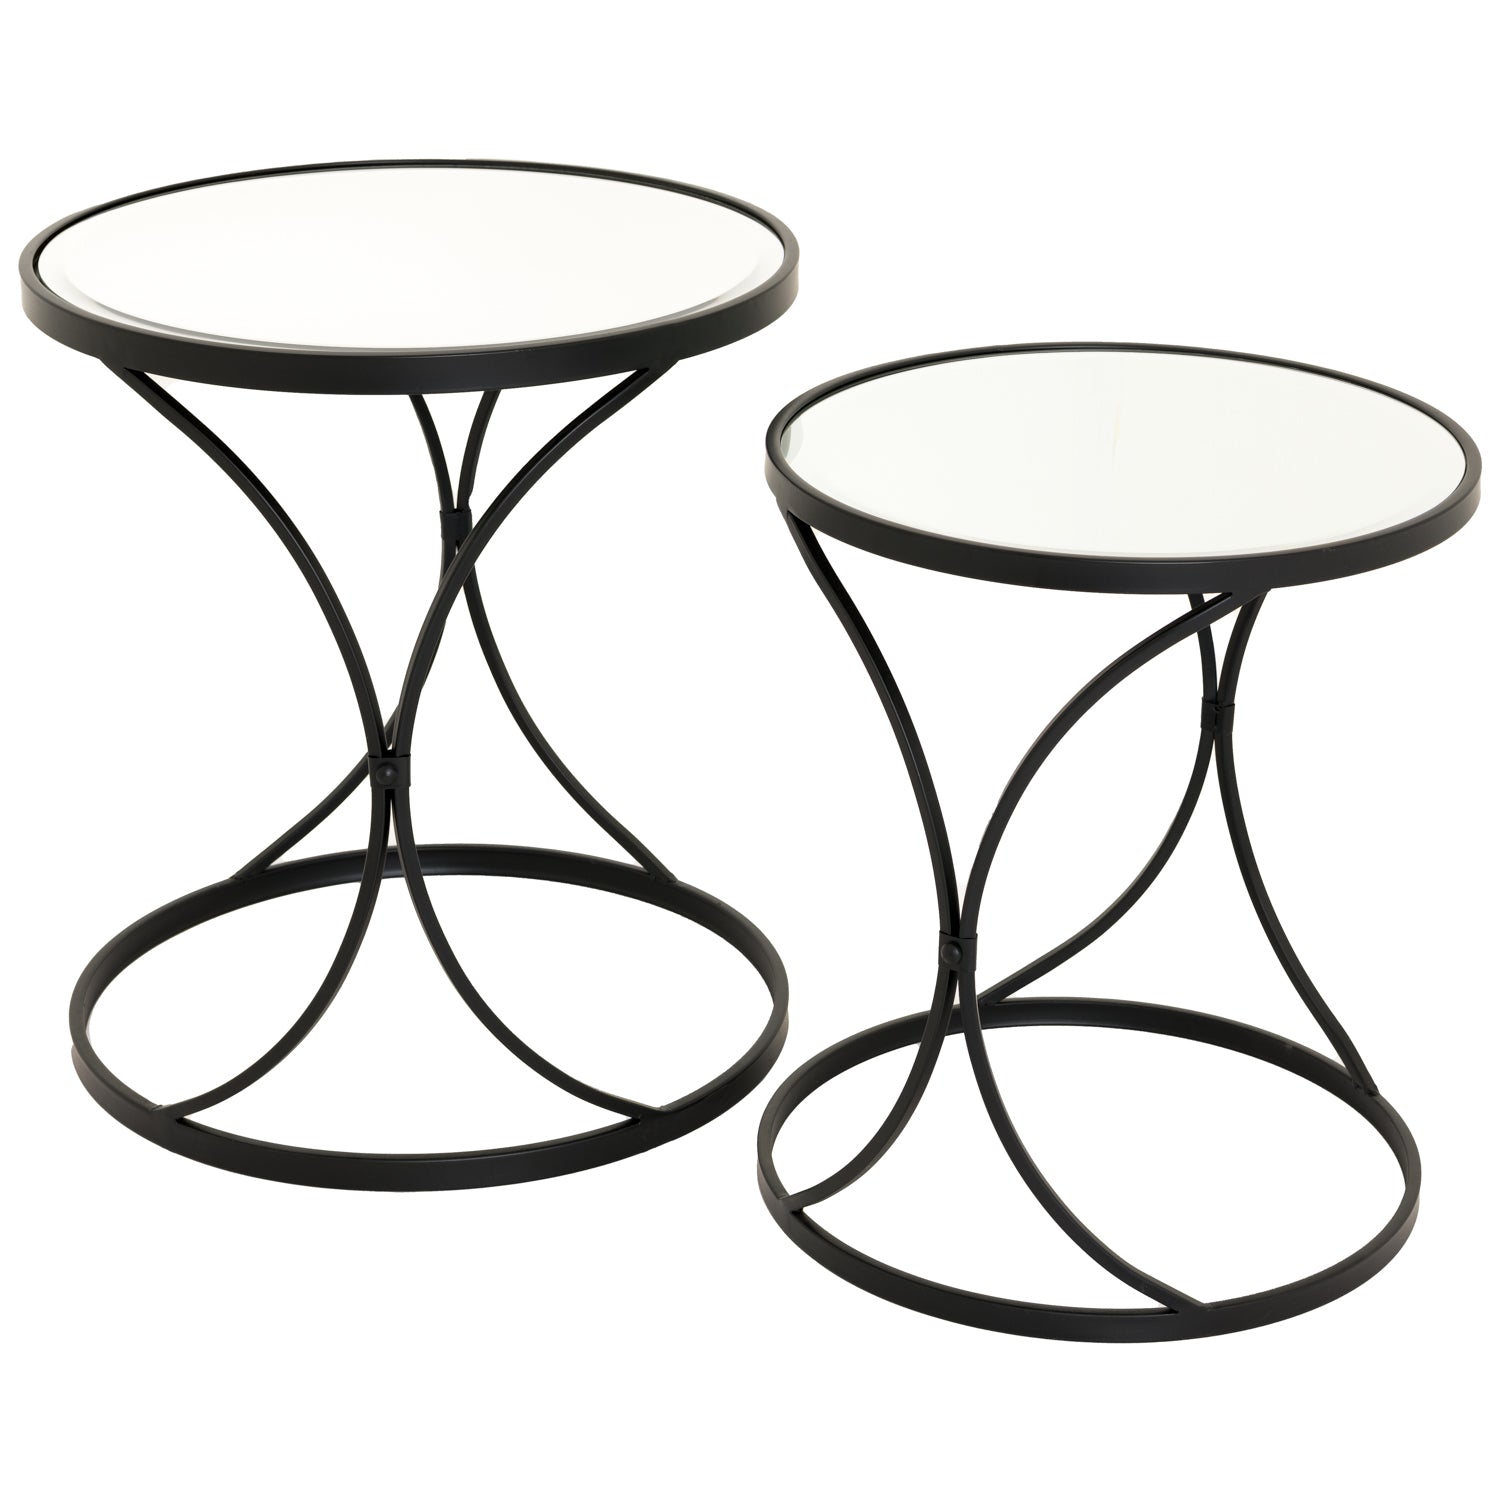 Concaved Set Of Two Black Mirrored Side Tables